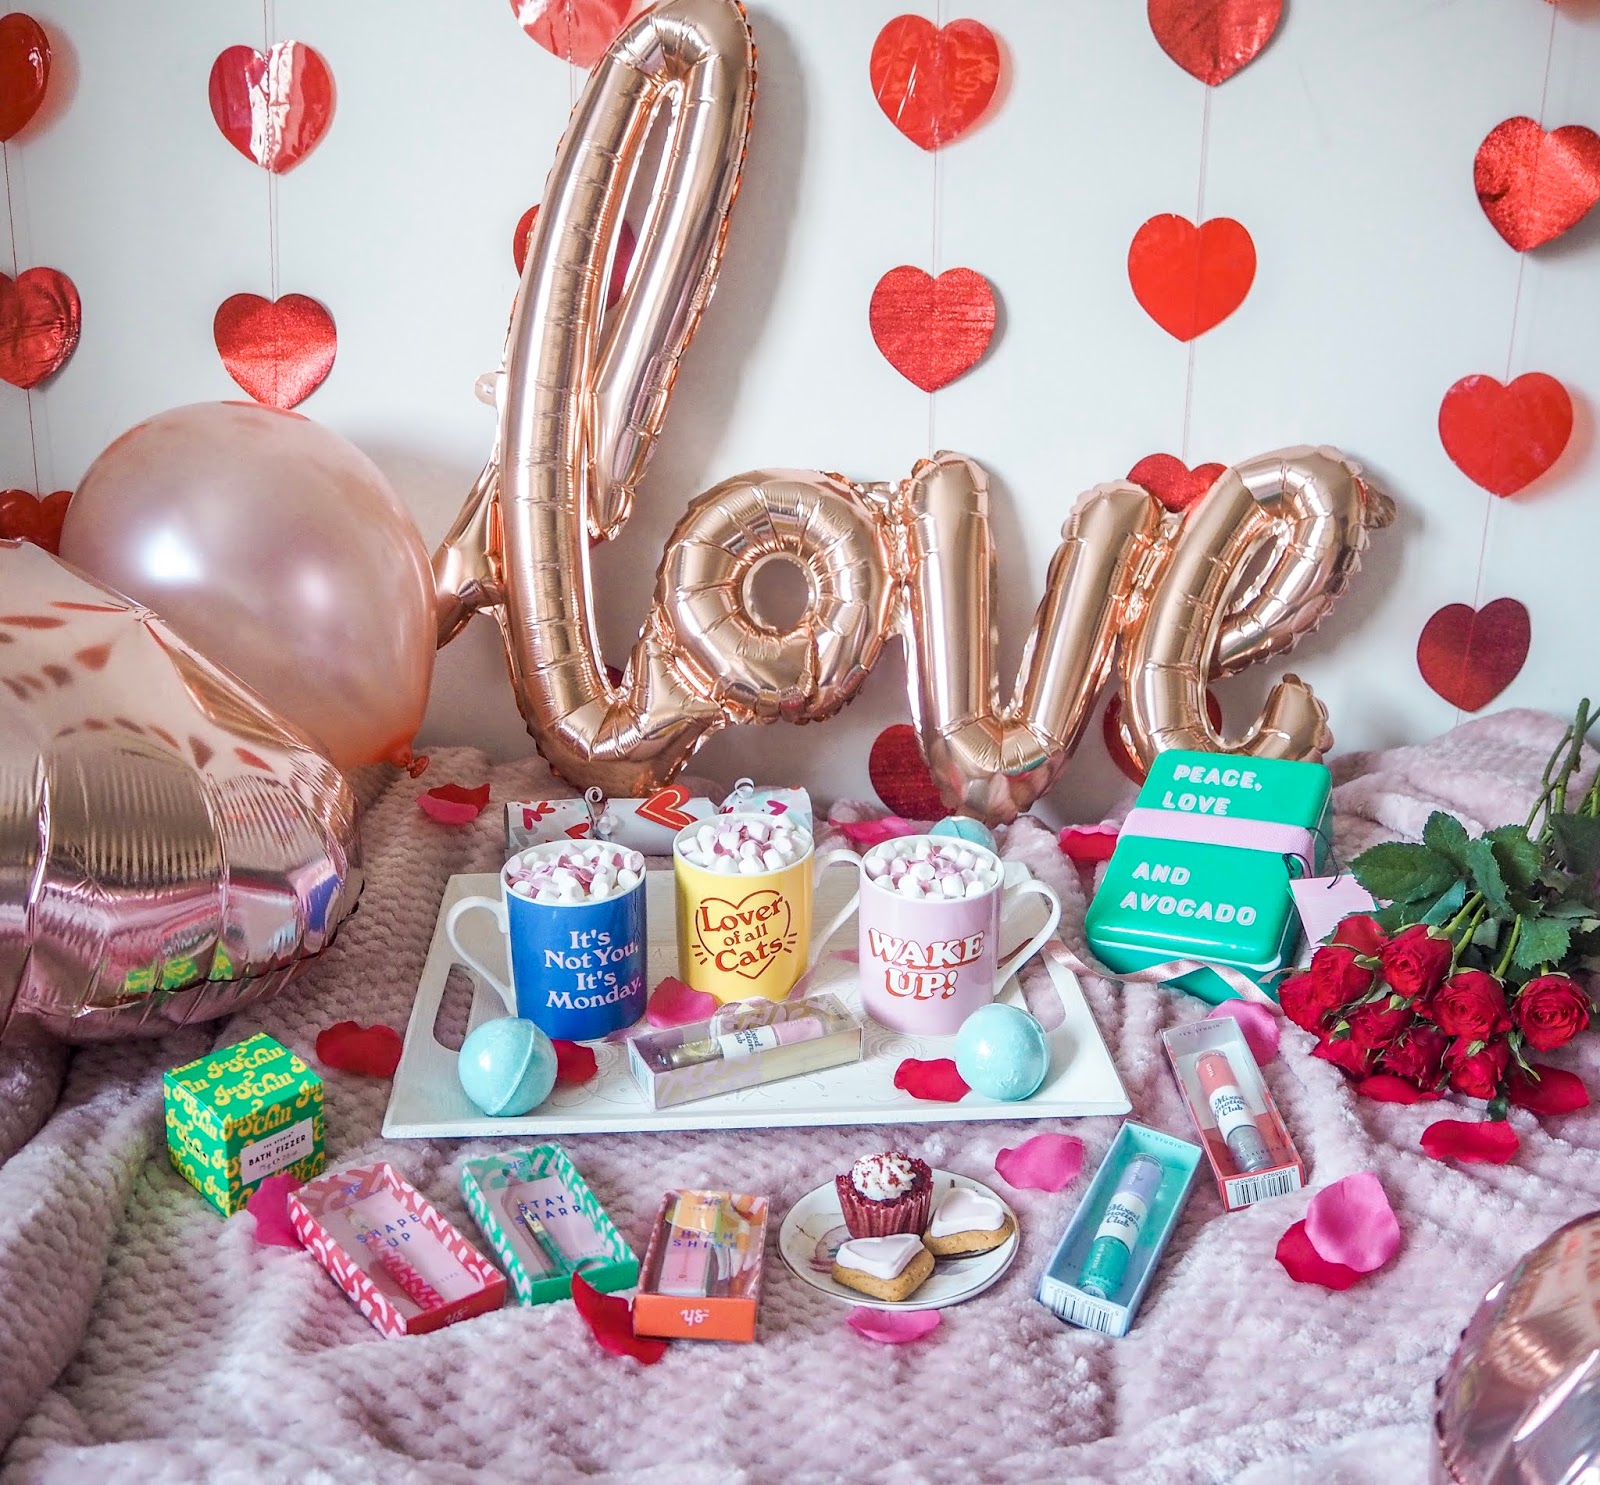 Celebrating Galentine's Day feat. Yes Studio, UK Blogger, Katie Kirk Loves, Galentines Gifts, Gifts for Her, Valentines Gifts, Girls Night, Girlie Day, Girls Night In, Valentines Style, Yes Studio Designs